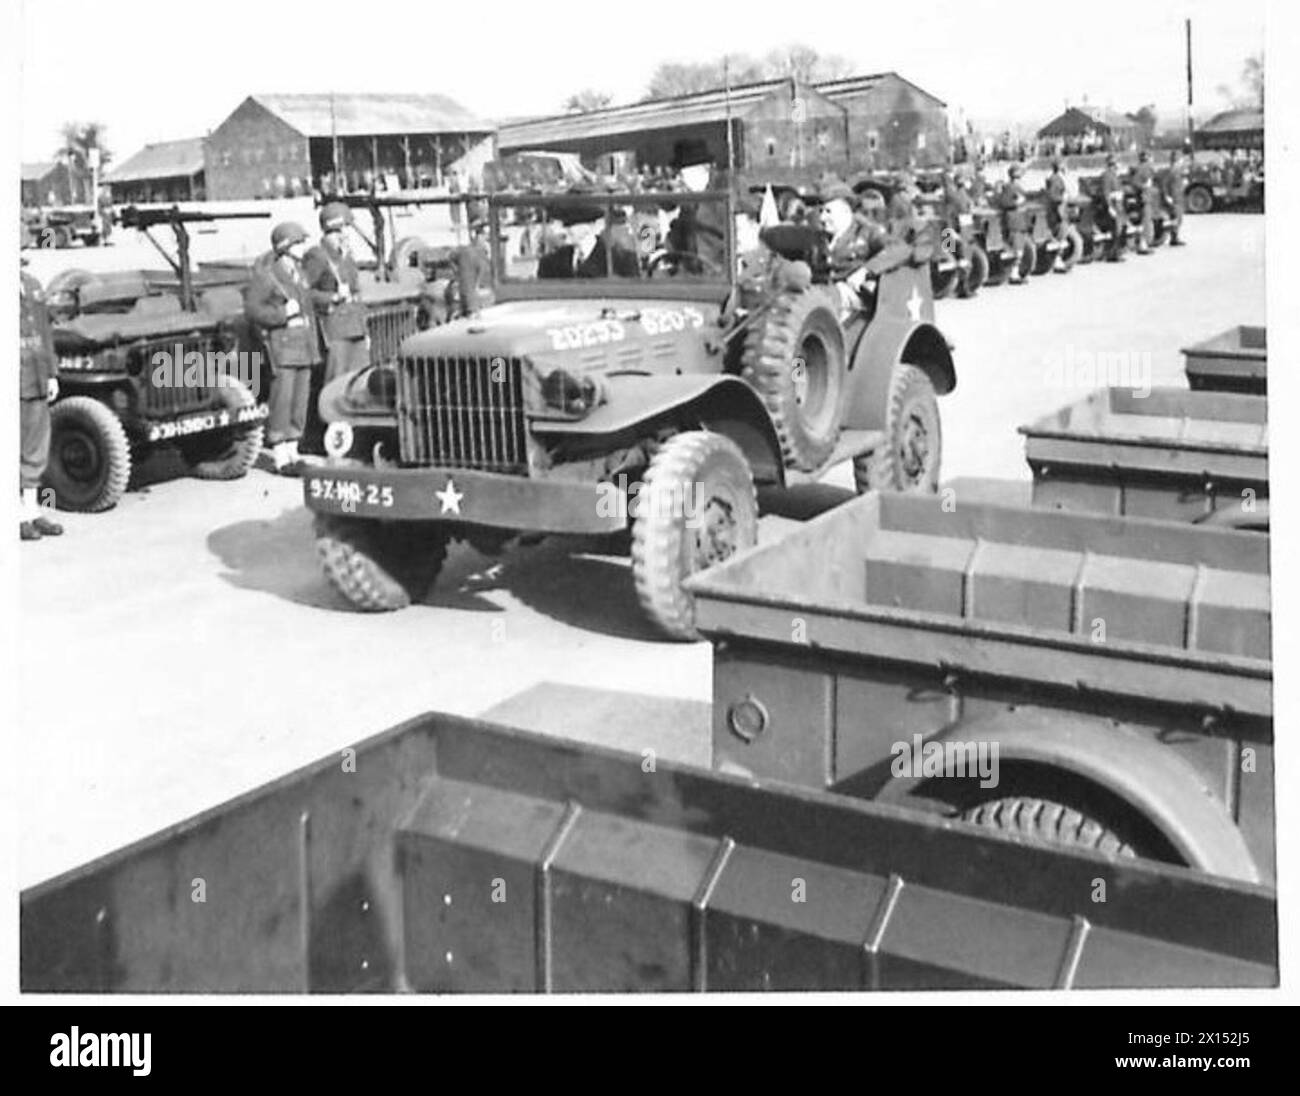 PRIME MINISTER VISITS AMERICAN TROOPS - The Prime Minister driving round ina Jeep and inspecting equipment and vehicles British Army Stock Photo